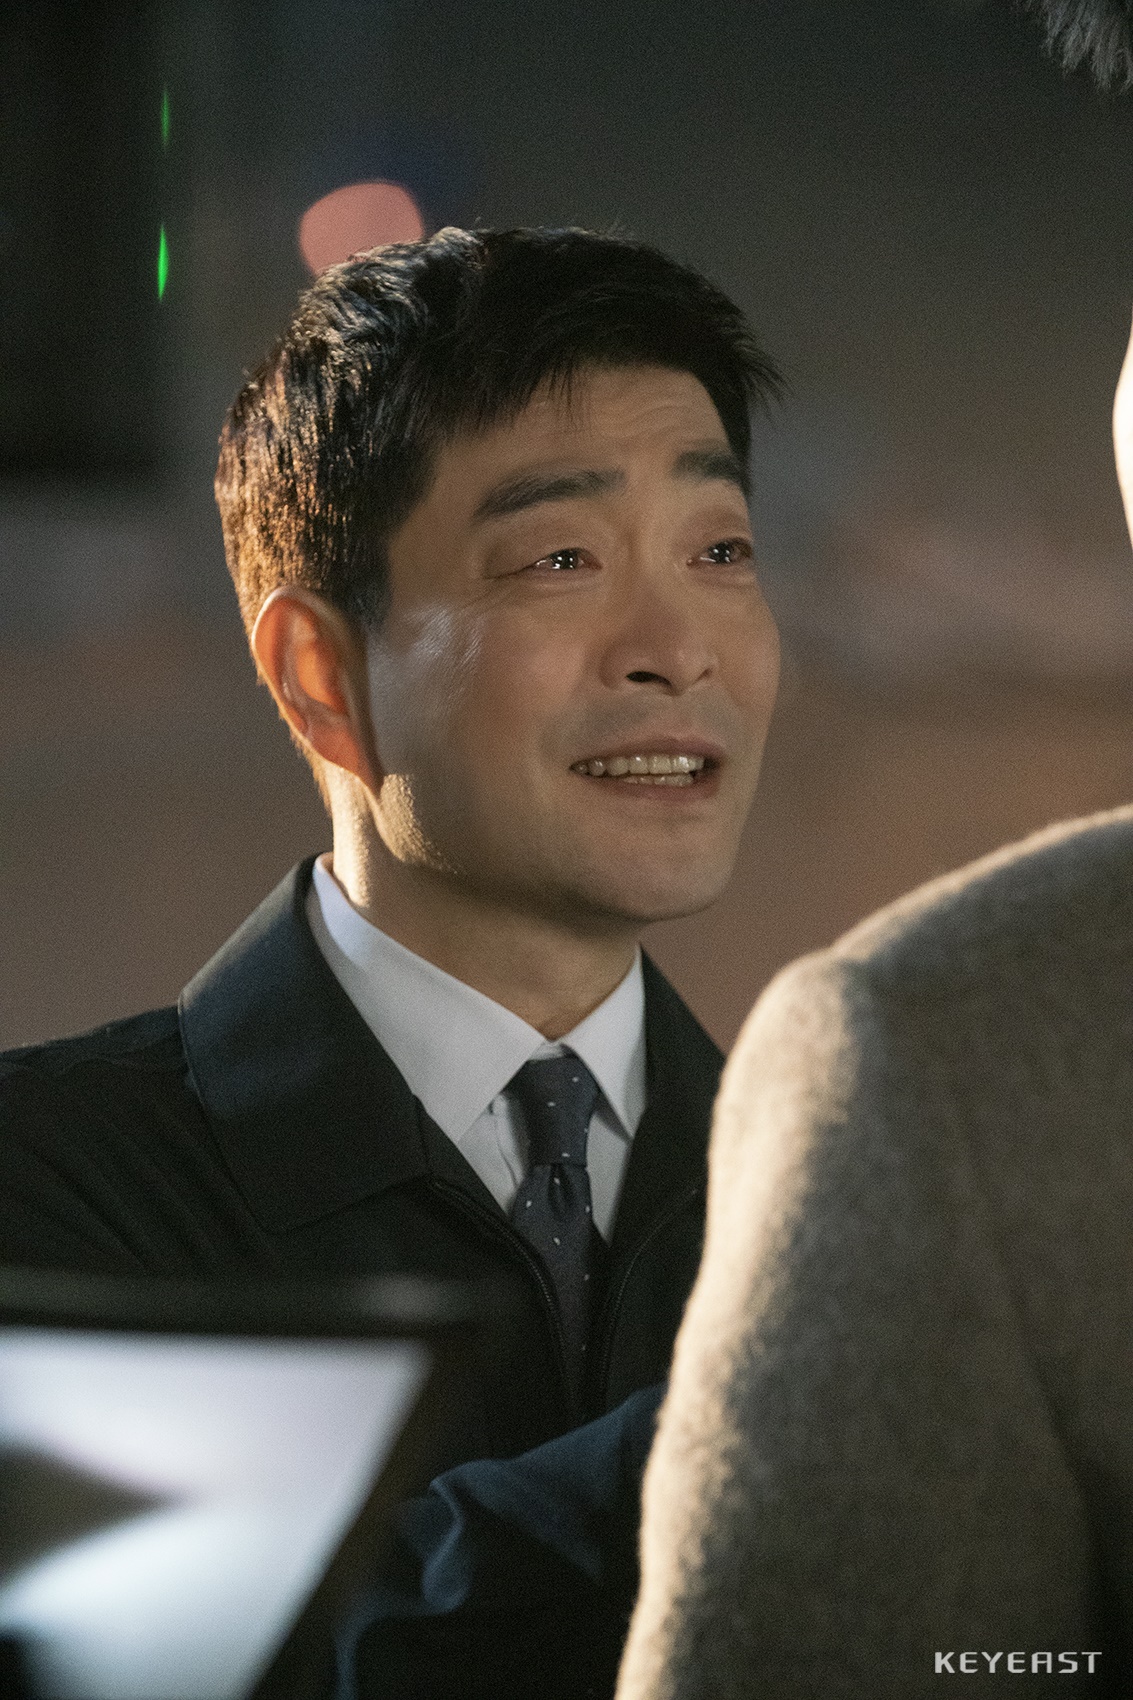 Son Hyun-joo reappeared in Itaewon Klath and captured Theater with a full presence.Son Hyun-joo made a special appearance as Park Sung-yeol, the father of Park Seo-joon, in the early part of JTBCs gilt drama Itaewon Klath, which enriched the narrative of Park Sae and increased the immersion of the drama.Son Hyun-joo, who re-appeared in Itaewon Klath on the 20th, left the end of the film, proved his name value with a luxury act that made the size of the role colorless.In the last 15 episodes, a scene was drawn in which Park Sae was in an accident and wandered through the scene, meeting with his father Park Sung-yeol in his dream.Park Sung-yeol was a warm father who still loved and loved his son in his dreams.The heart-wrenching rich reunion scene added a deep look and delicate look of Son Hyo-jo, leaving a deep impression on viewers.Son Hyun-joos Acting interior, which is filled with Itaewon Klath, can be found in the behind-the-cut.I am sorry and sorry for my son who has lived hard without my father, and I am grateful for his hard life.In addition, it makes the hearts of those who see in the way of cheering silently while holding the Roy who chose life at the crossroads of death.Viewers who watched the broadcast on this day said, Park Seo-joon - Son Hyun-joo Actor Acting Biggest!, Son Hyun-joo Acting was the best, Son Hyun-joo.Acting crazy and so on.Son Hyun-joo, who is well received for his outstanding acting ability, is currently preparing to meet with viewers with JTBCs new Mon-Tue drama The Good Detective.The Good DetectiveDetective is an exciting rhetoric that tracks a concealed truth that is too different from two different Detectives. Son Hyun-joo plays the role of the Detective Robbery Window in the 18th year armed with toughness and loyalty.It is a homicide team that catches a felon, but it is expected to reach viewers with familiar charm like a man in the city.Meanwhile, JTBCs new Mon-Tue drama The Good DetectiveDetective starring Son Hyo-jo is scheduled to air in April.iMBC Kim Hye-young  Photo Keith